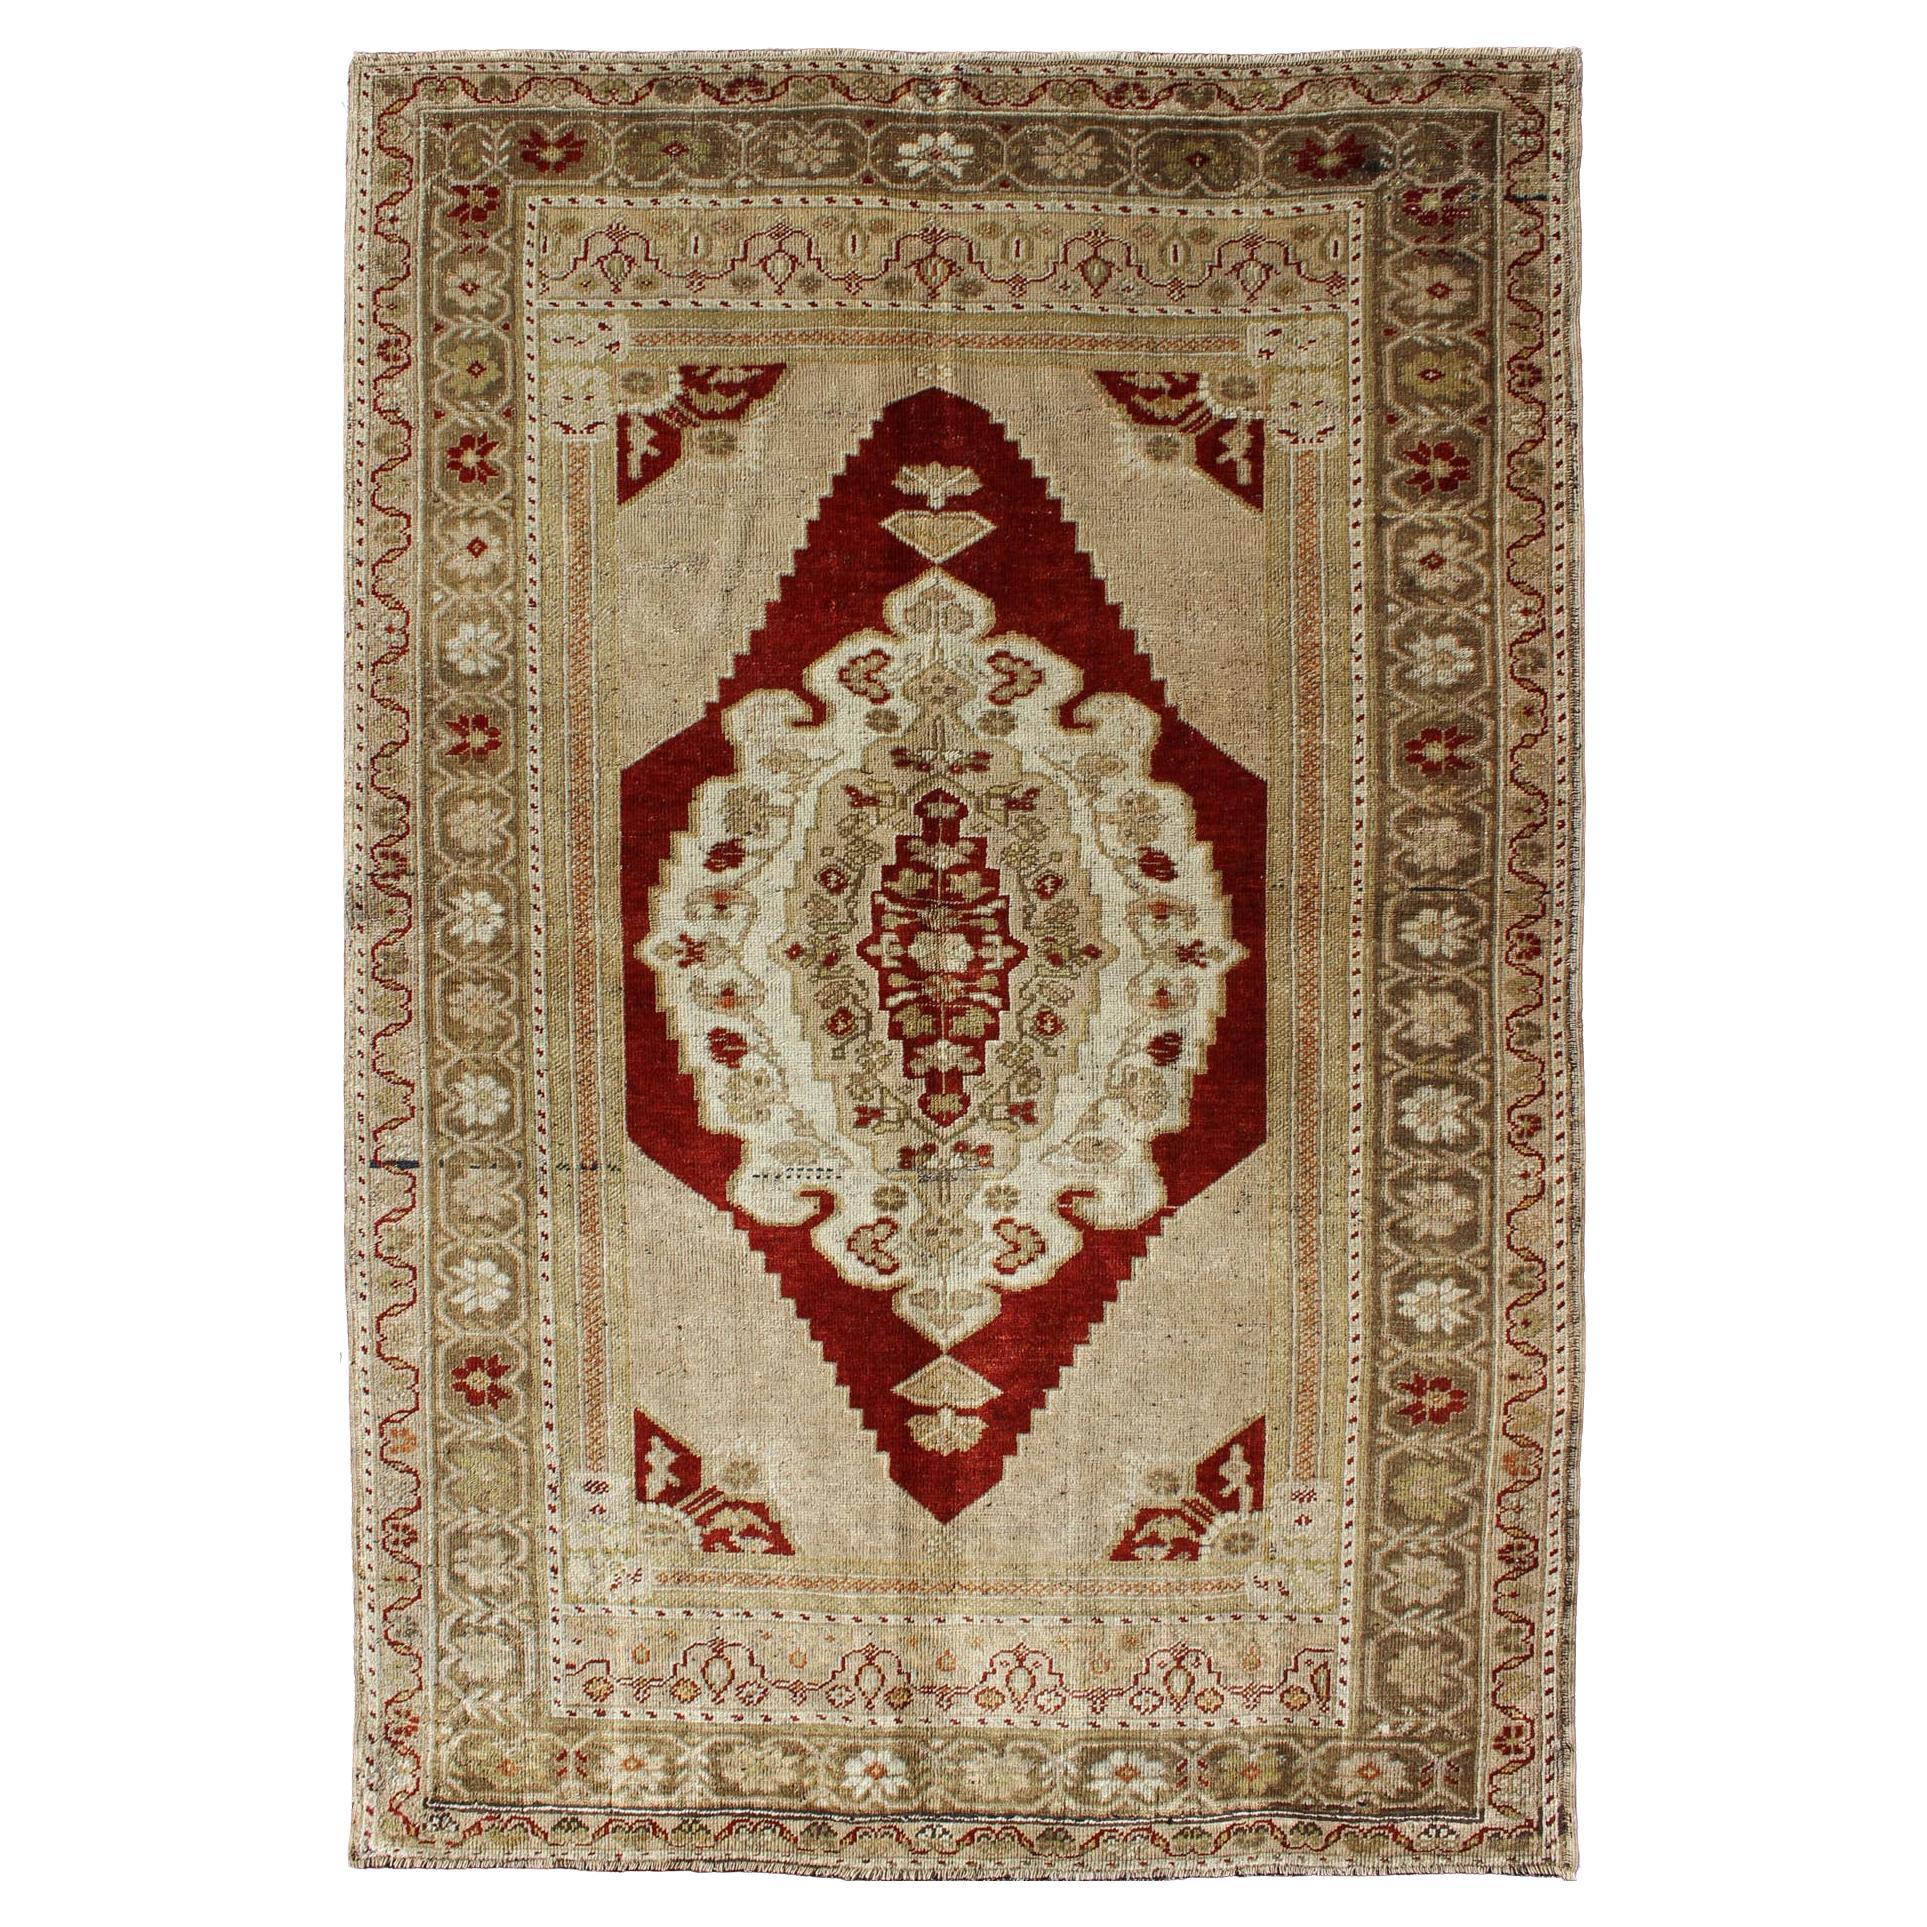 Vintage Turkish Layered Medallion Oushak Rug in Dark Red and Neutrals For Sale